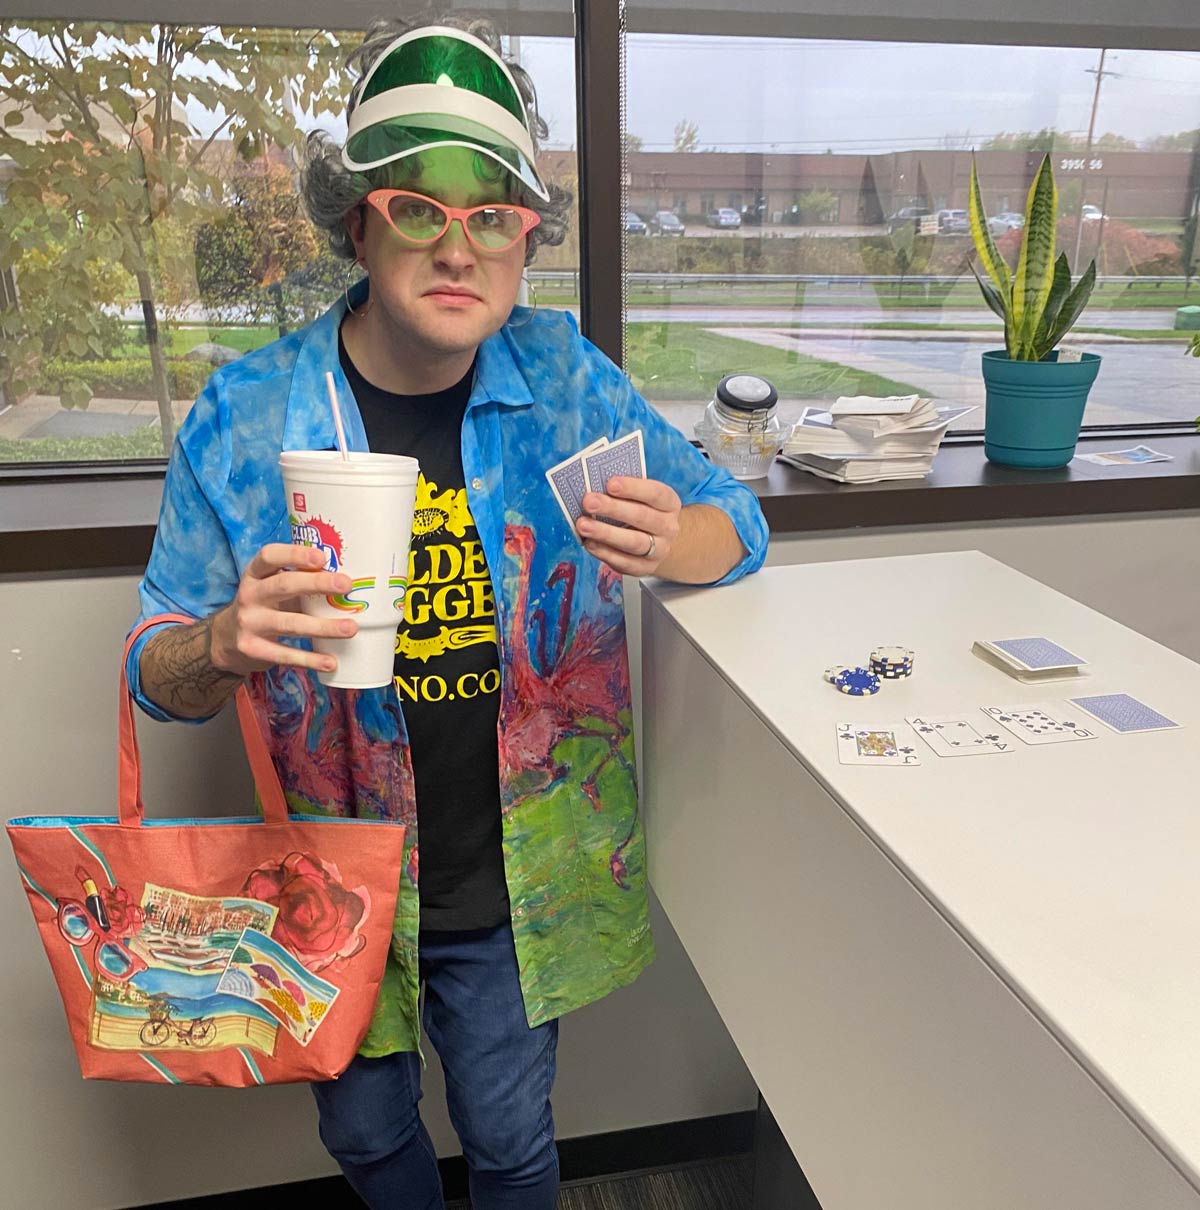 Won my office costume contest as a “Gamblin’ Granny”!